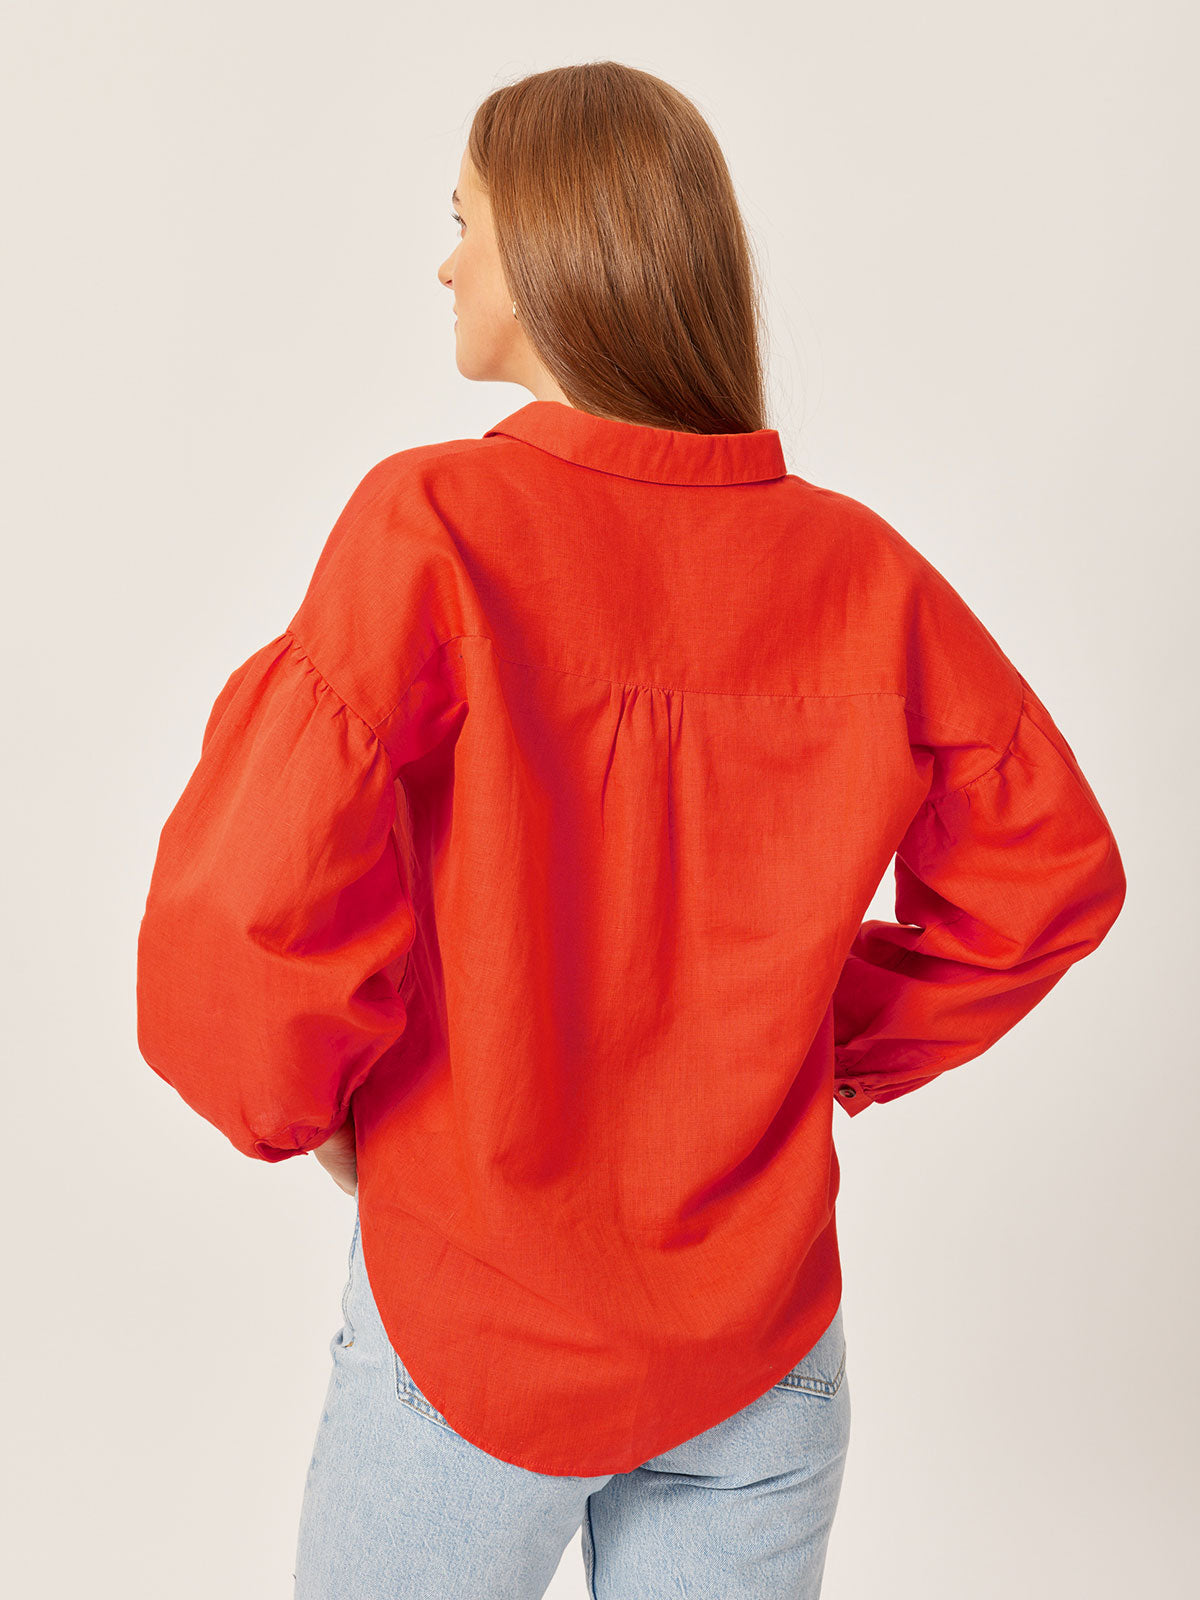 A model is pictured from behind wearing the sustainable Martha shirt, with their hair pulled to one side. 